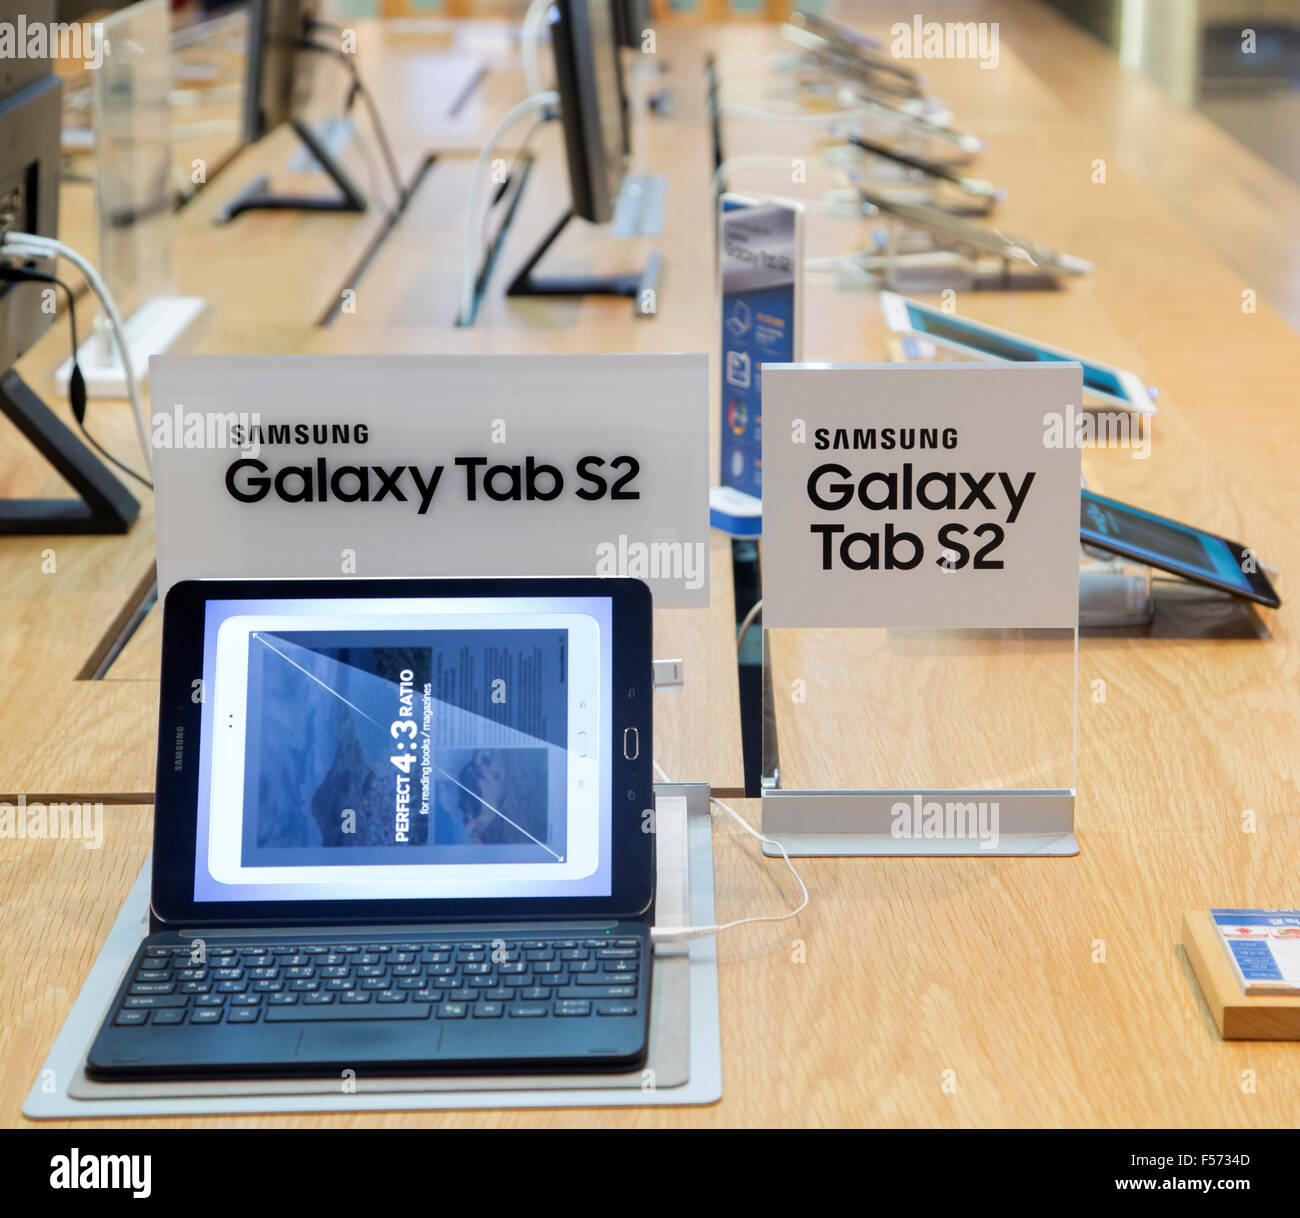 Seoul, South Korea. 29th Oct, 2015. Samsung Electronics, Oct 29, 2015 : Samsung Electronics' Galaxy Tab S2 devices are displayed at Samsung headquarters in Seoul, South Korea. Samsung Electronics said on Thursday its net profit soared about 30 percent on-year in the third quarter, supported by chip sales and foreign exchange rates, local media reported. Credit:  Lee Jae-Won/AFLO/Alamy Live News Stock Photo